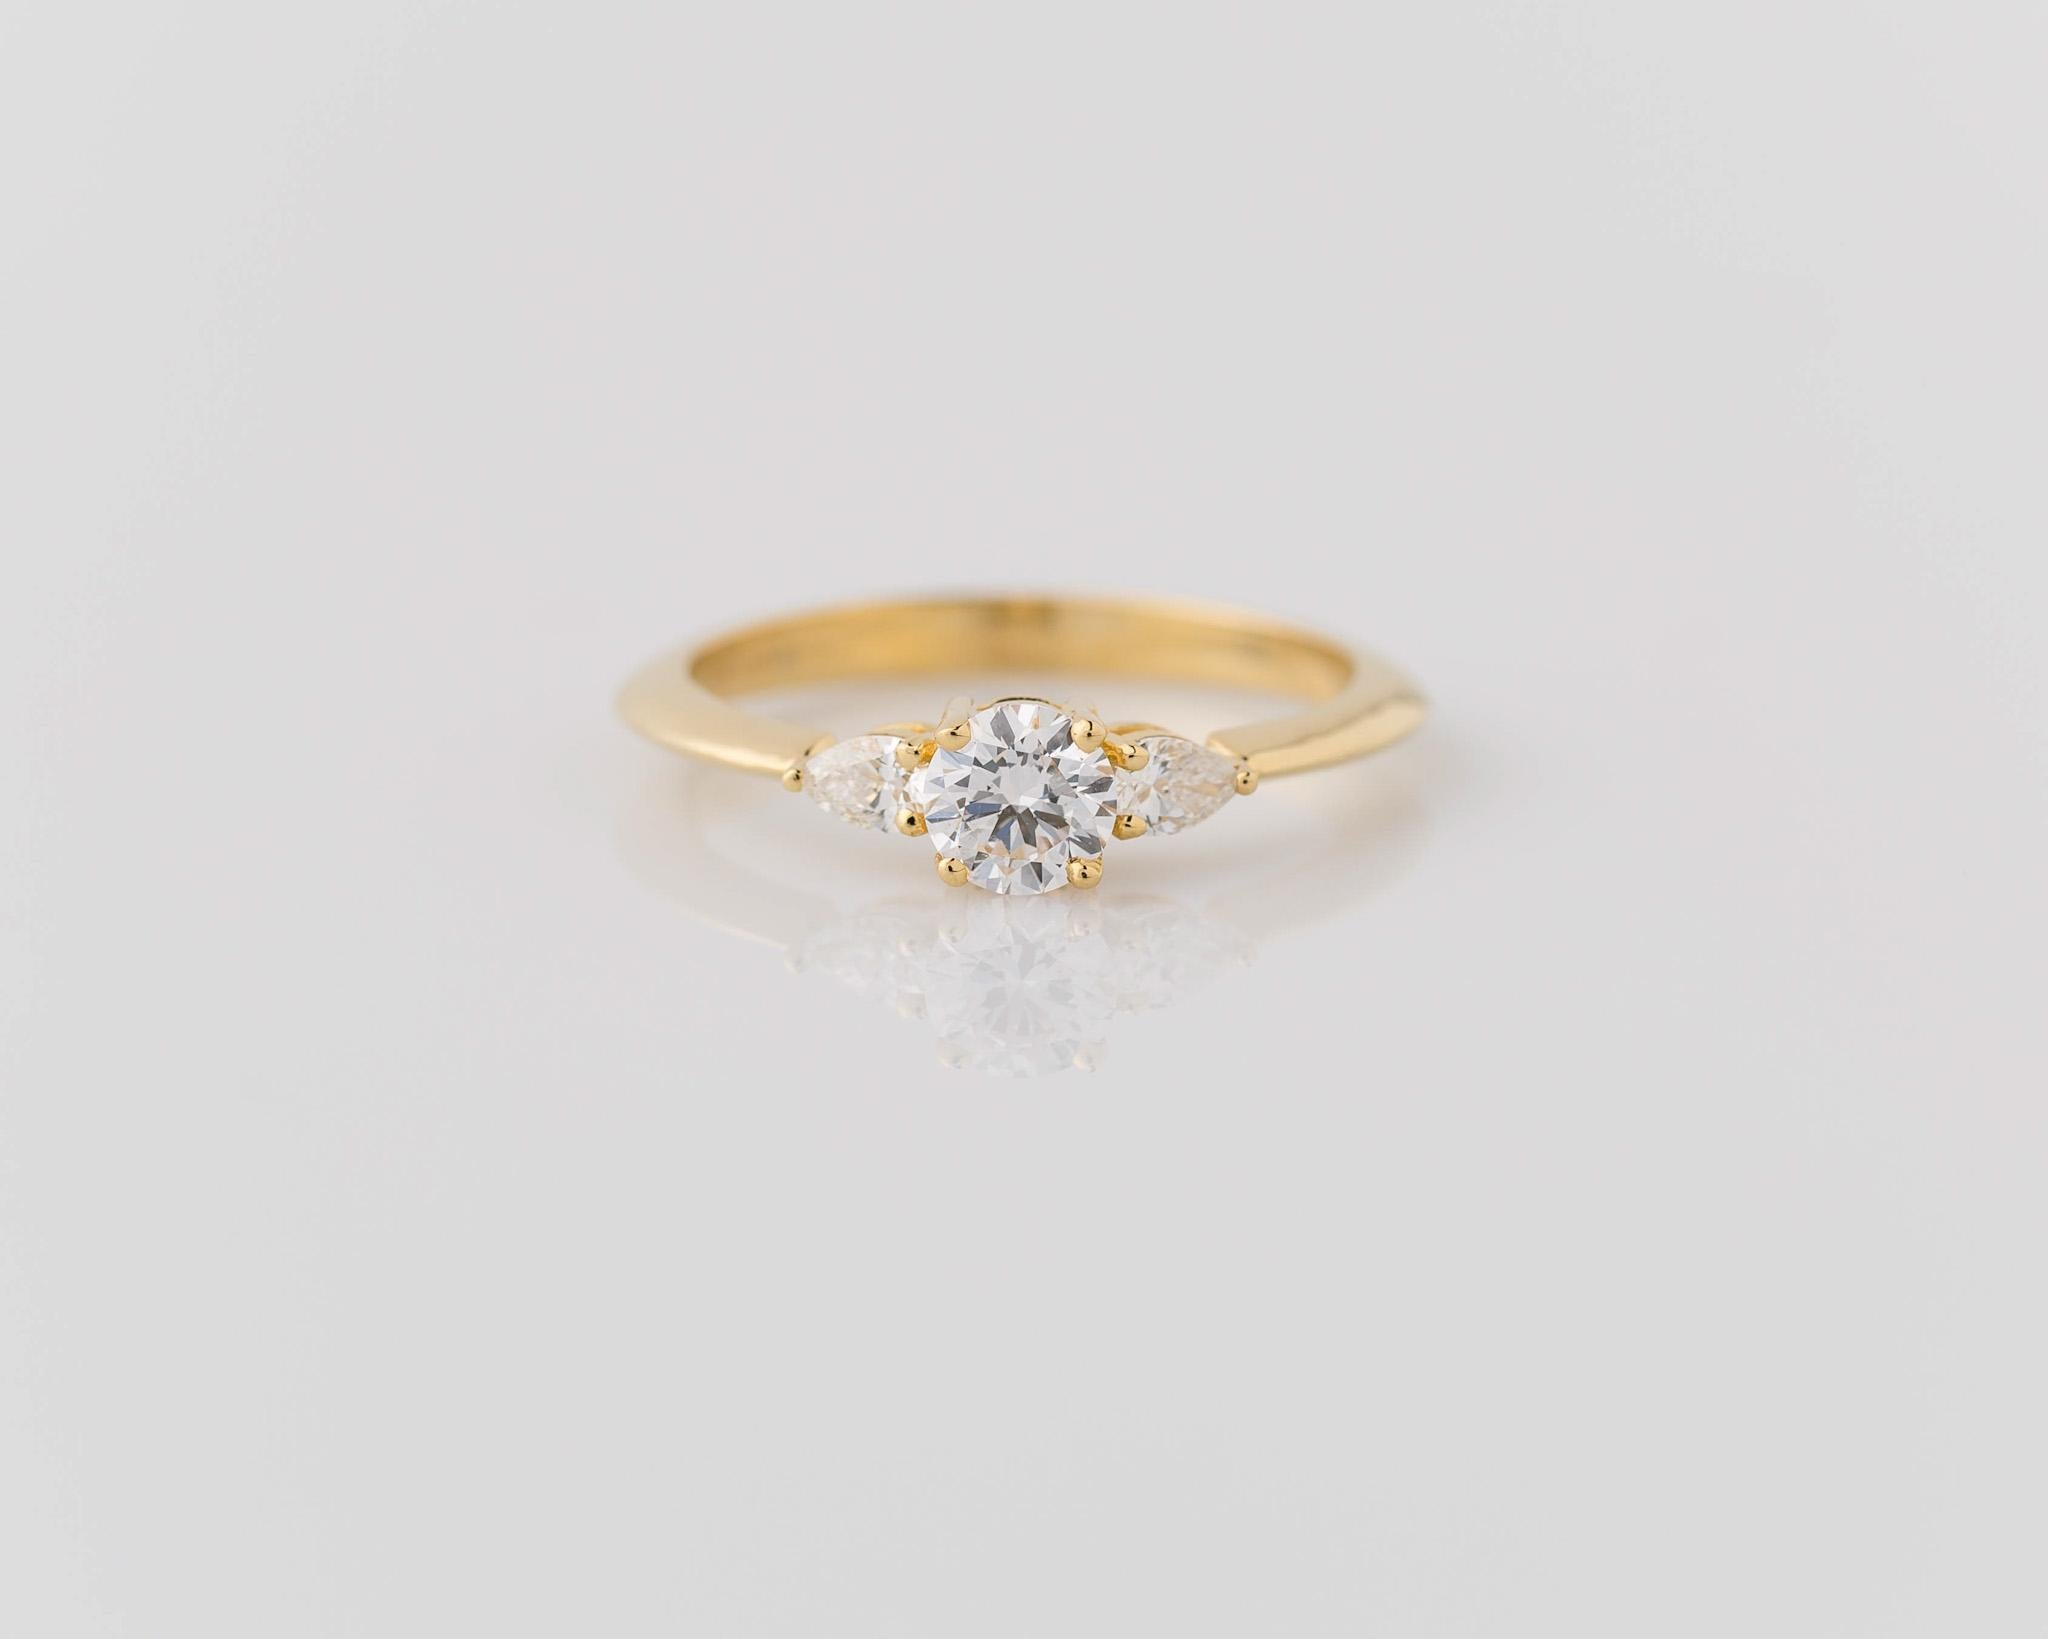 Delight in elegance with this dainty 14k yellow gold 3-stone round diamond GIA certified engagement ring. Its petite design adds to its charm, making it perfect for everyday wear. Each GIA-certified diamond sparkles with brilliance, symbolizing